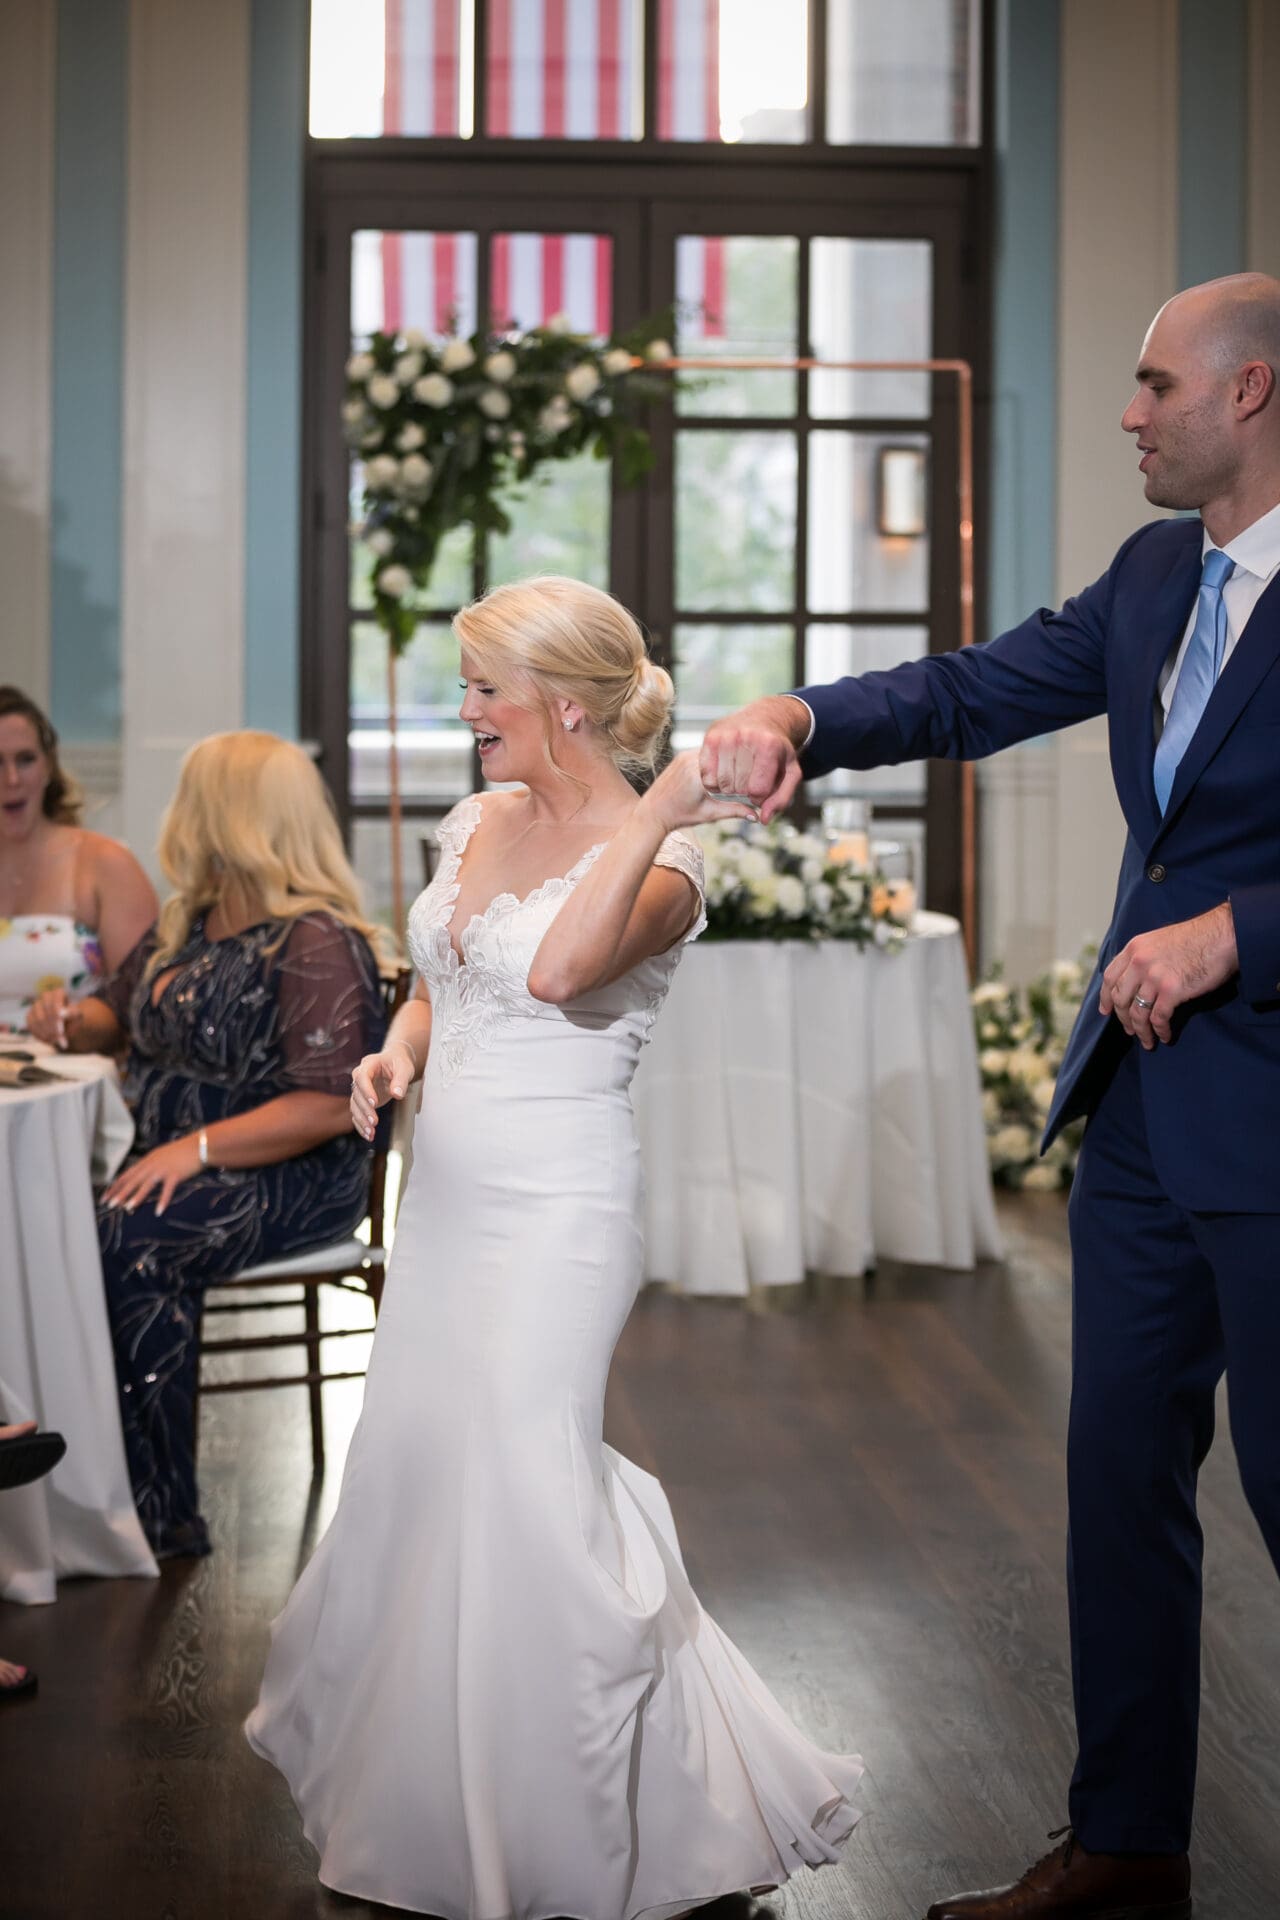 A groom is twirling his bride on the dance floor during their first dance at their wedding reception